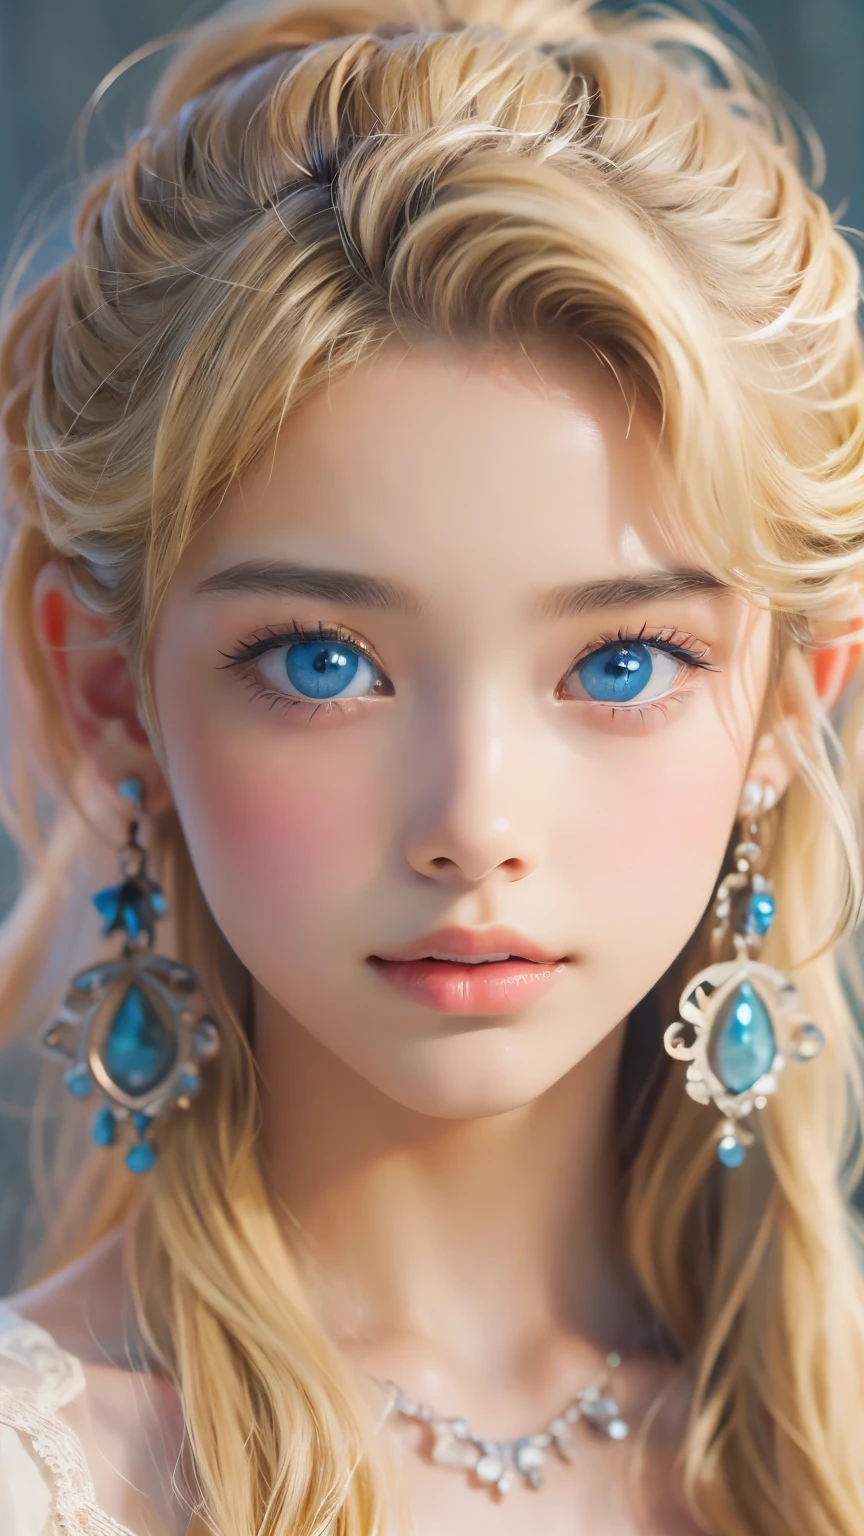 ((sfw: 1.4)), ((detailed face,  professional photography)), ((sfw, ( blond hair), Large, clear sky-blue eyes, earrings, 1 Girl)), Ultra High Resolution, (Realistic: 1.4), RAW Photo, Best Quality, (Photorealistic Stick), Focus, Soft Light, ((15 years old)), (( (young face))), (surface), (depth of field), masterpiece, (realistic), woman, bangs, ((1 girl))